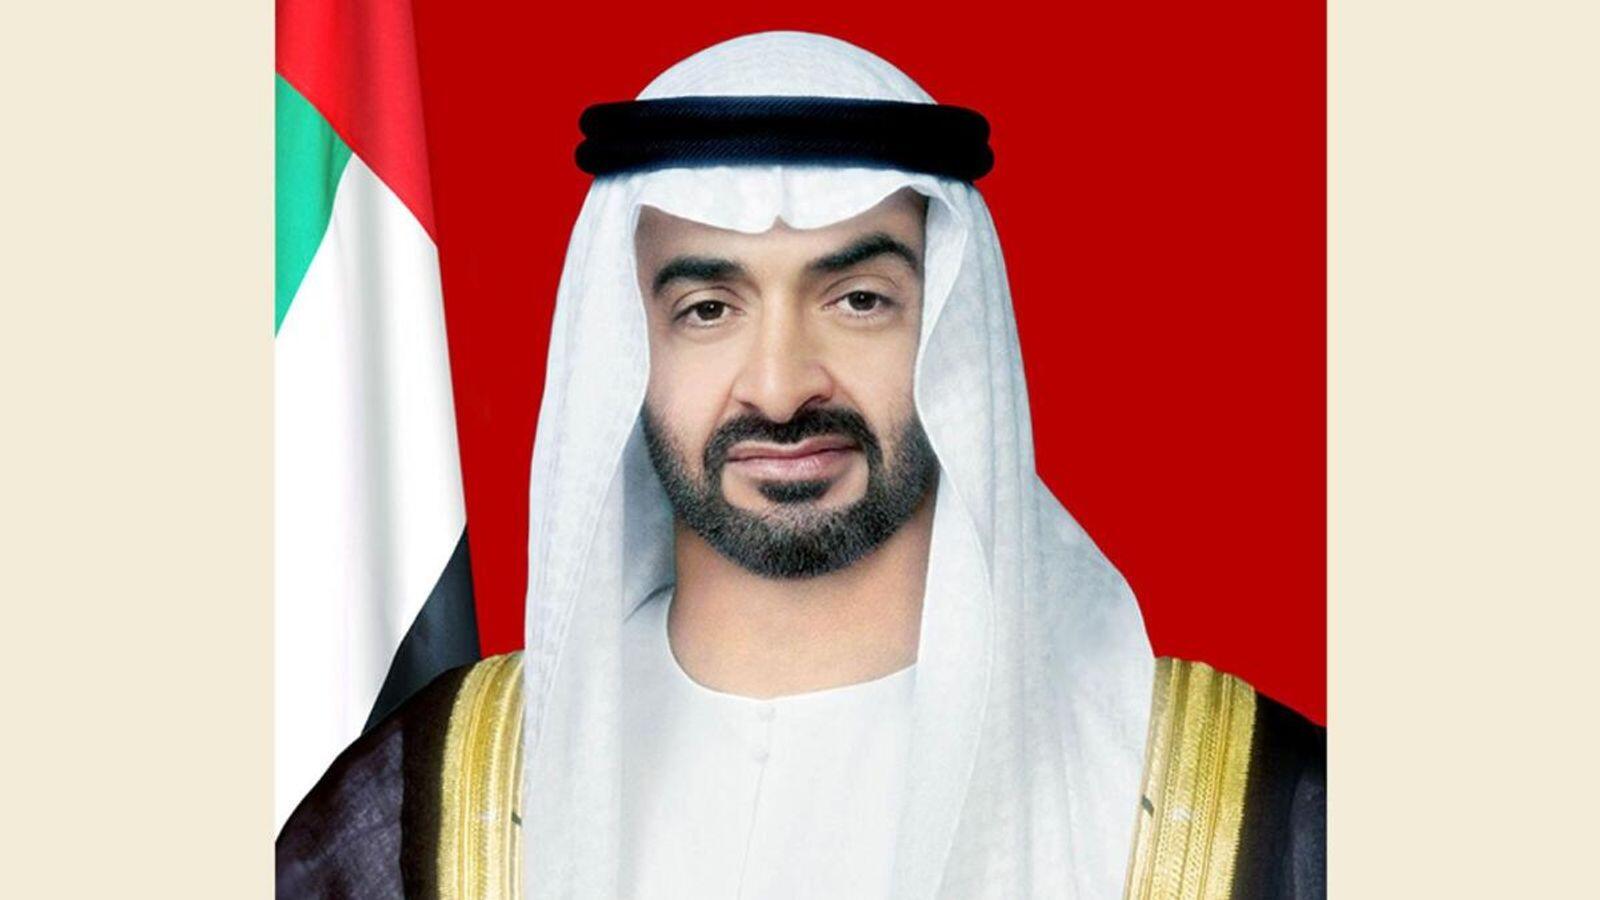 Contentsquare congratulates Sheikh Mohamed bin Zayed on his appointment to the President of the UAE - News